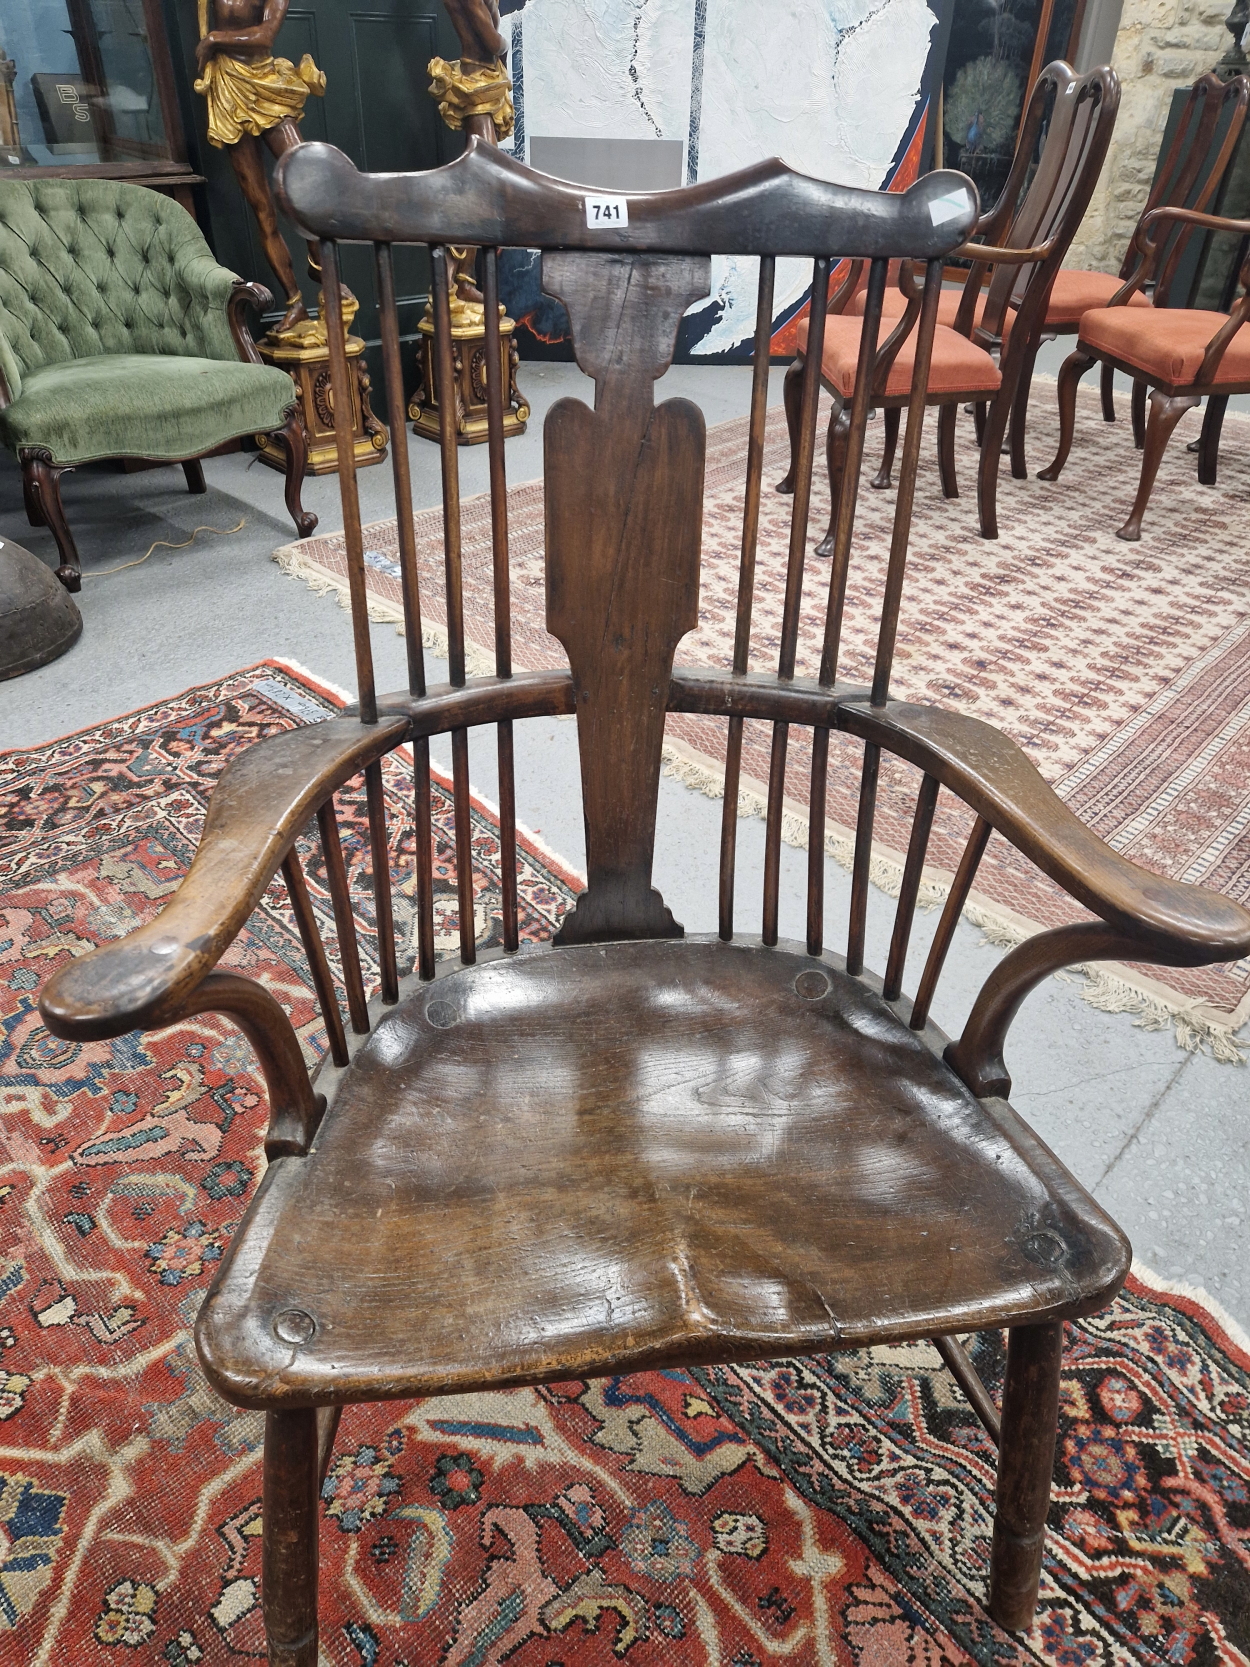 AN 18TH / 19TH CENTURY COUNTRY MADE WINDSOR TYPE CHAIR WITH SHAPED CREST RAIL AND BALUSTER BACK - Image 2 of 10